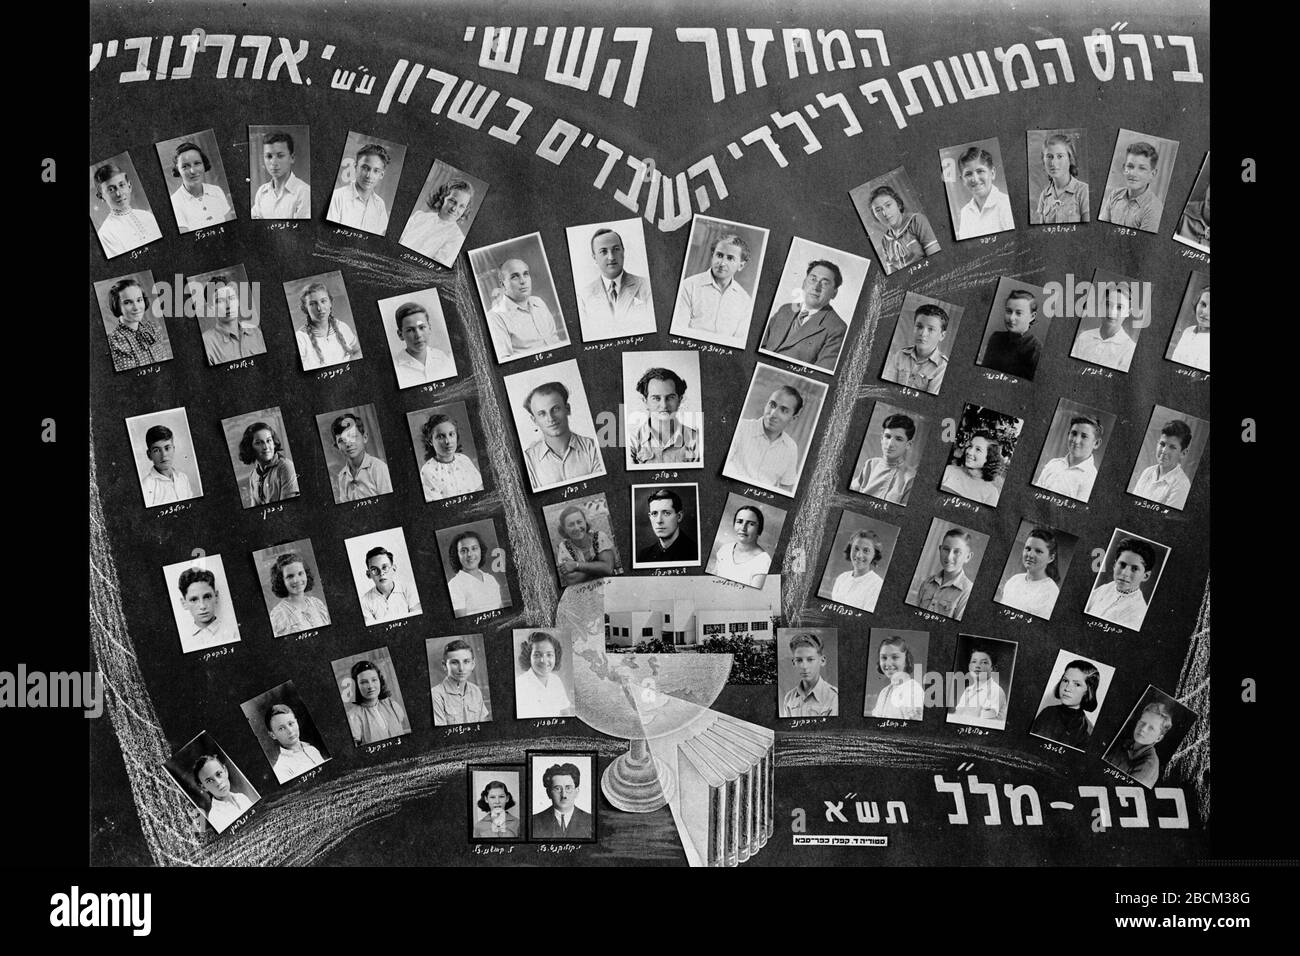 English Sixth Class Photograph Of The Sharon Workers School Named After Y Aharonovitz In Kfar Malal Near Kfar Saba U I I U O N I I C O C O C U E O I I U C I U O U I O I I E I